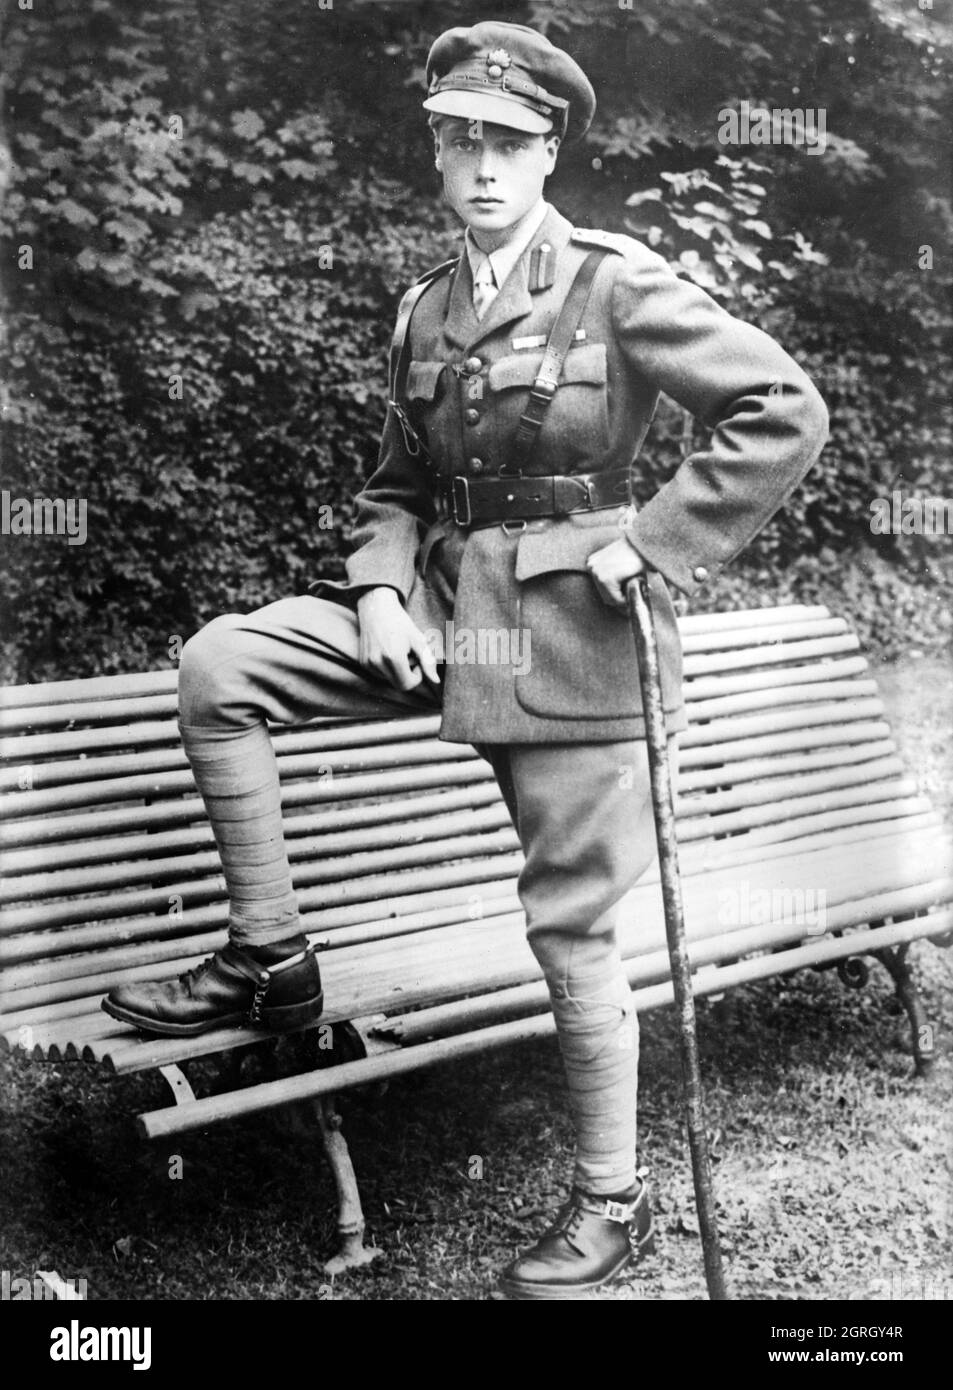 Vintage photo dated 1915 showing the Prince of Wales and future king Edward Windsor (Edward the Eighth) as a young man in uniform during world war one.   Edward served in the British Army during the First World War having joined the Grenadier Guards in June 1914.   He later abdicated the throne after seeking to marry Wallis Simpson the divorced American socialite Stock Photo